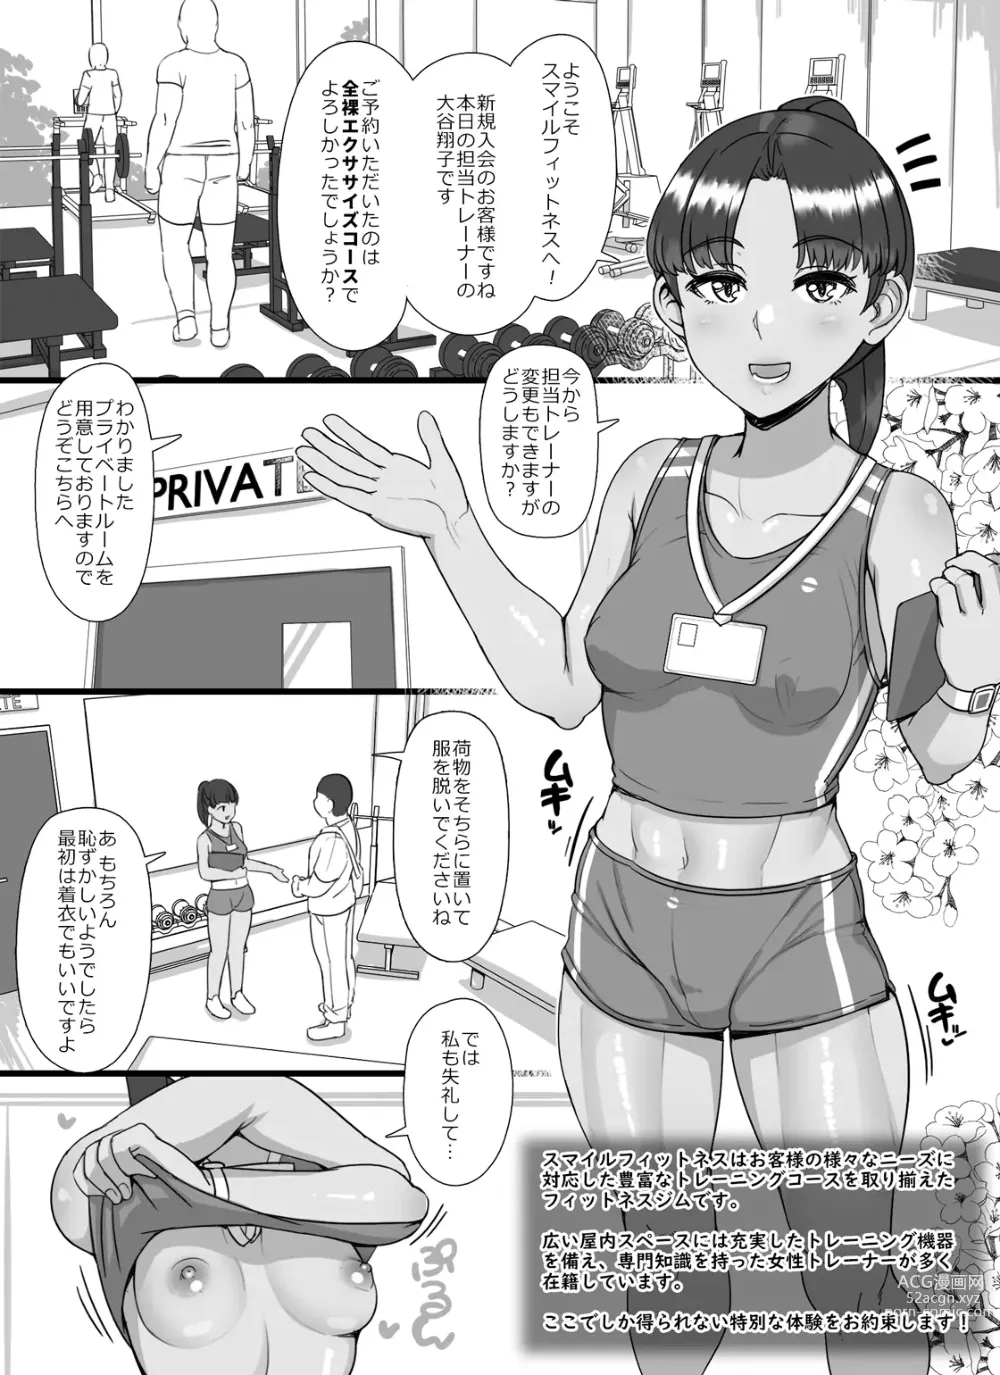 Page 1 of doujinshi The naked exercise course!